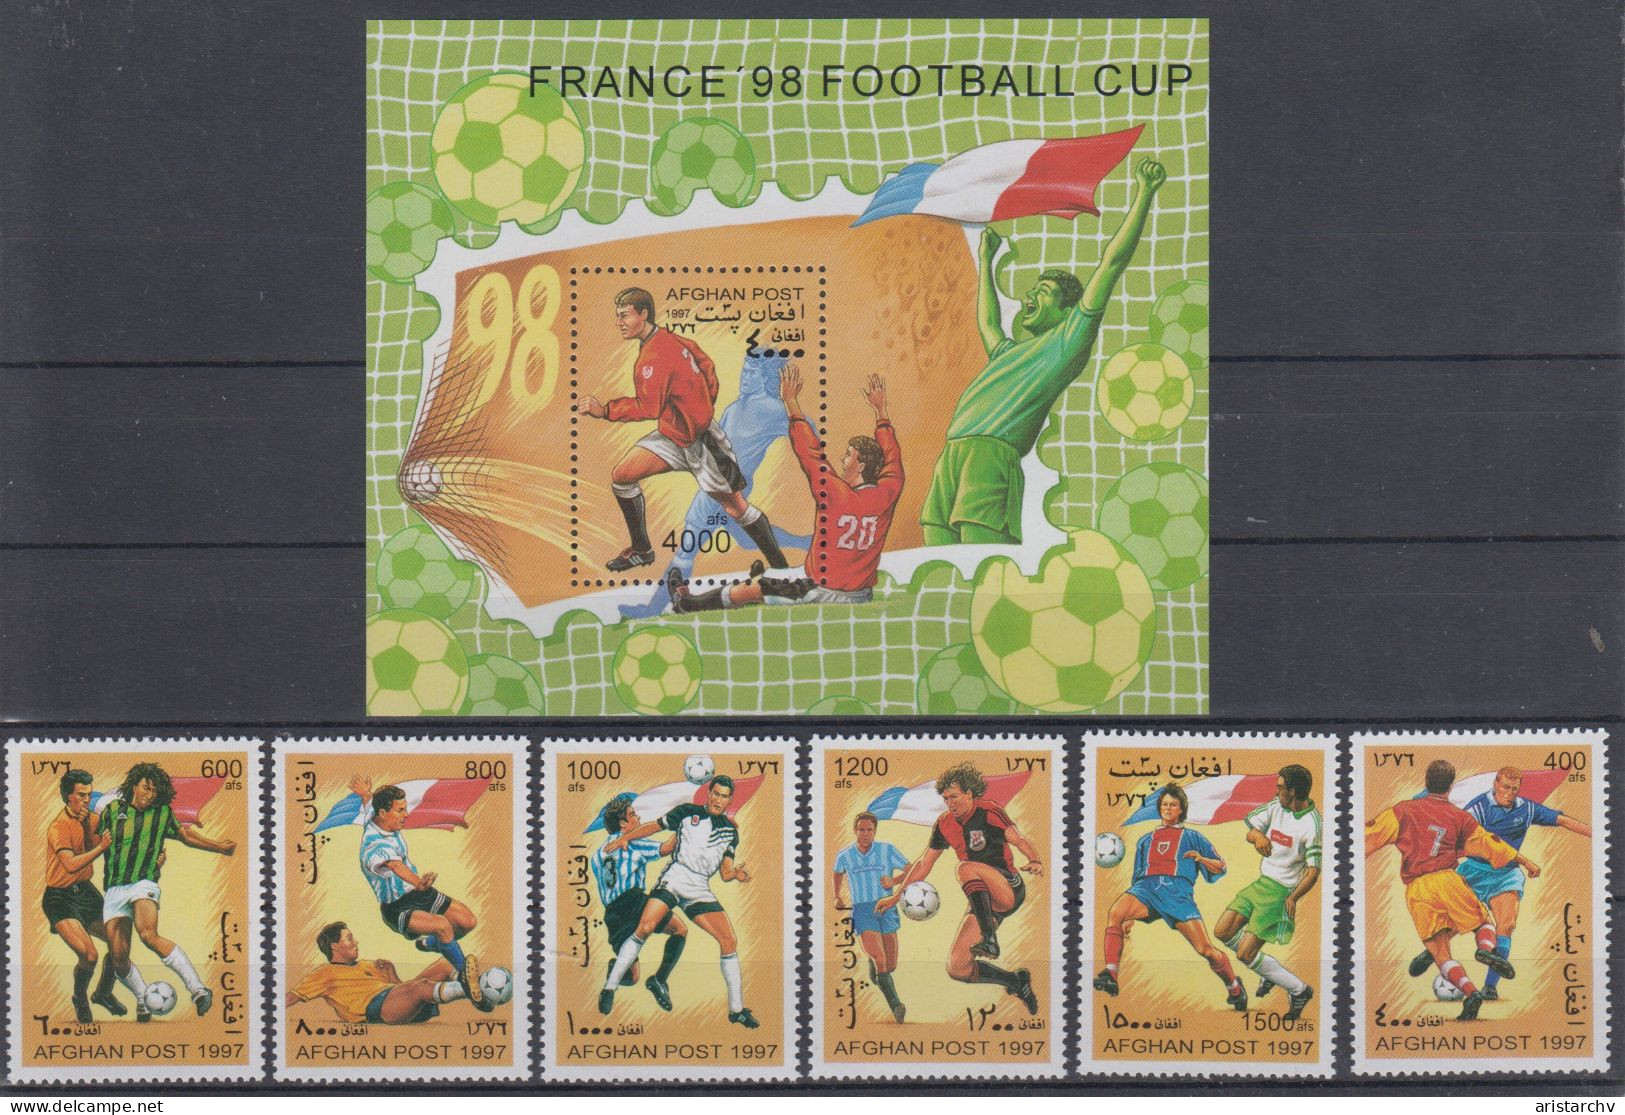 AFGHANISTAN 1998 FOOTBALL WORLD CUP S/SHEET AND 6 STAMPS - 1998 – Frankrijk